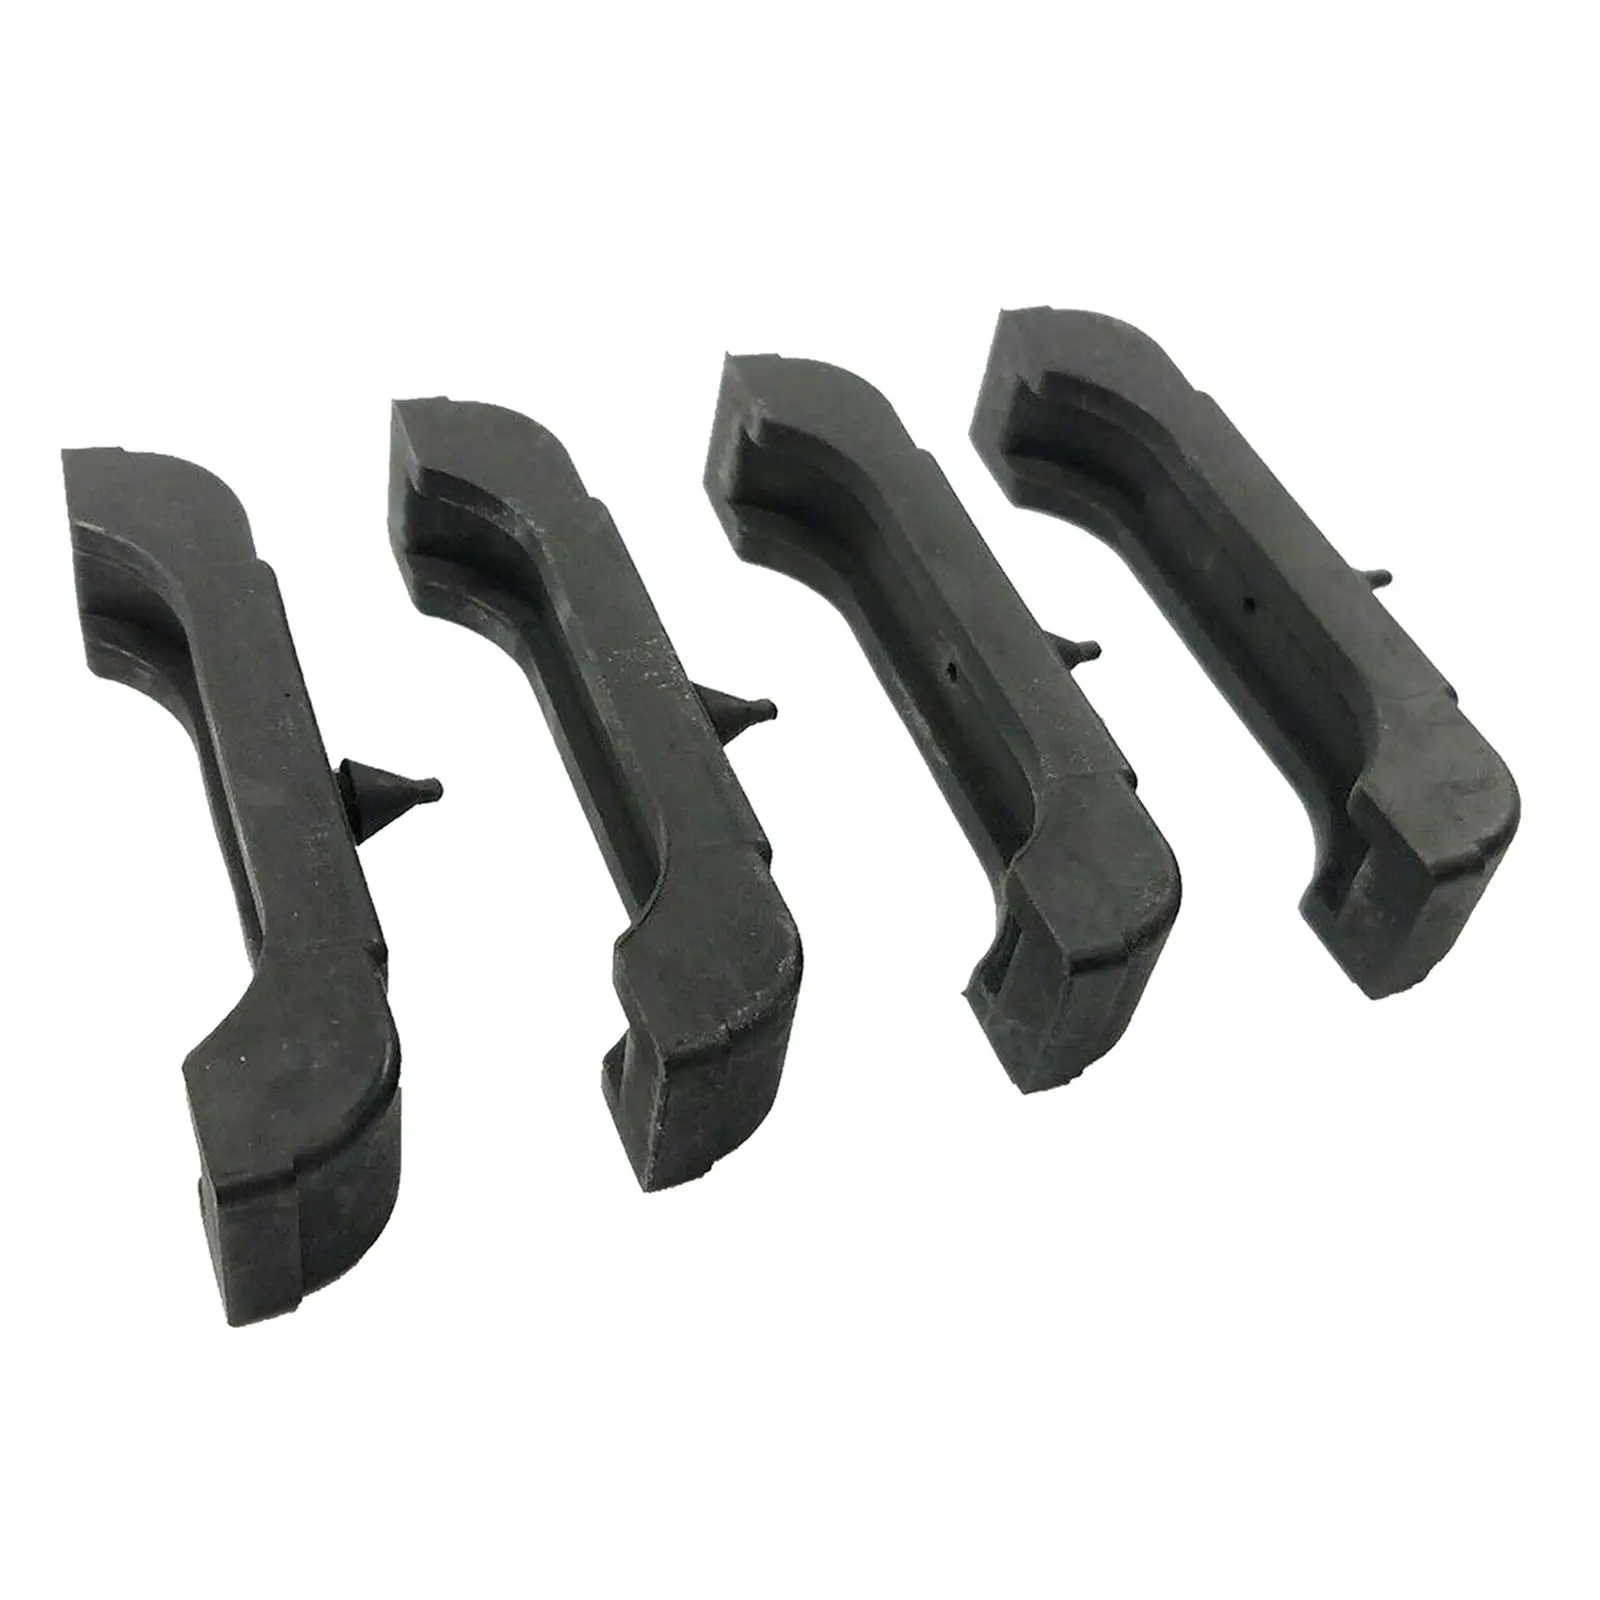 4 Pcs Rubber Support Pads of Radiator Mounting Cushions Fit for GM Cars 1968-1981 Auto Replacement Cooling System Part